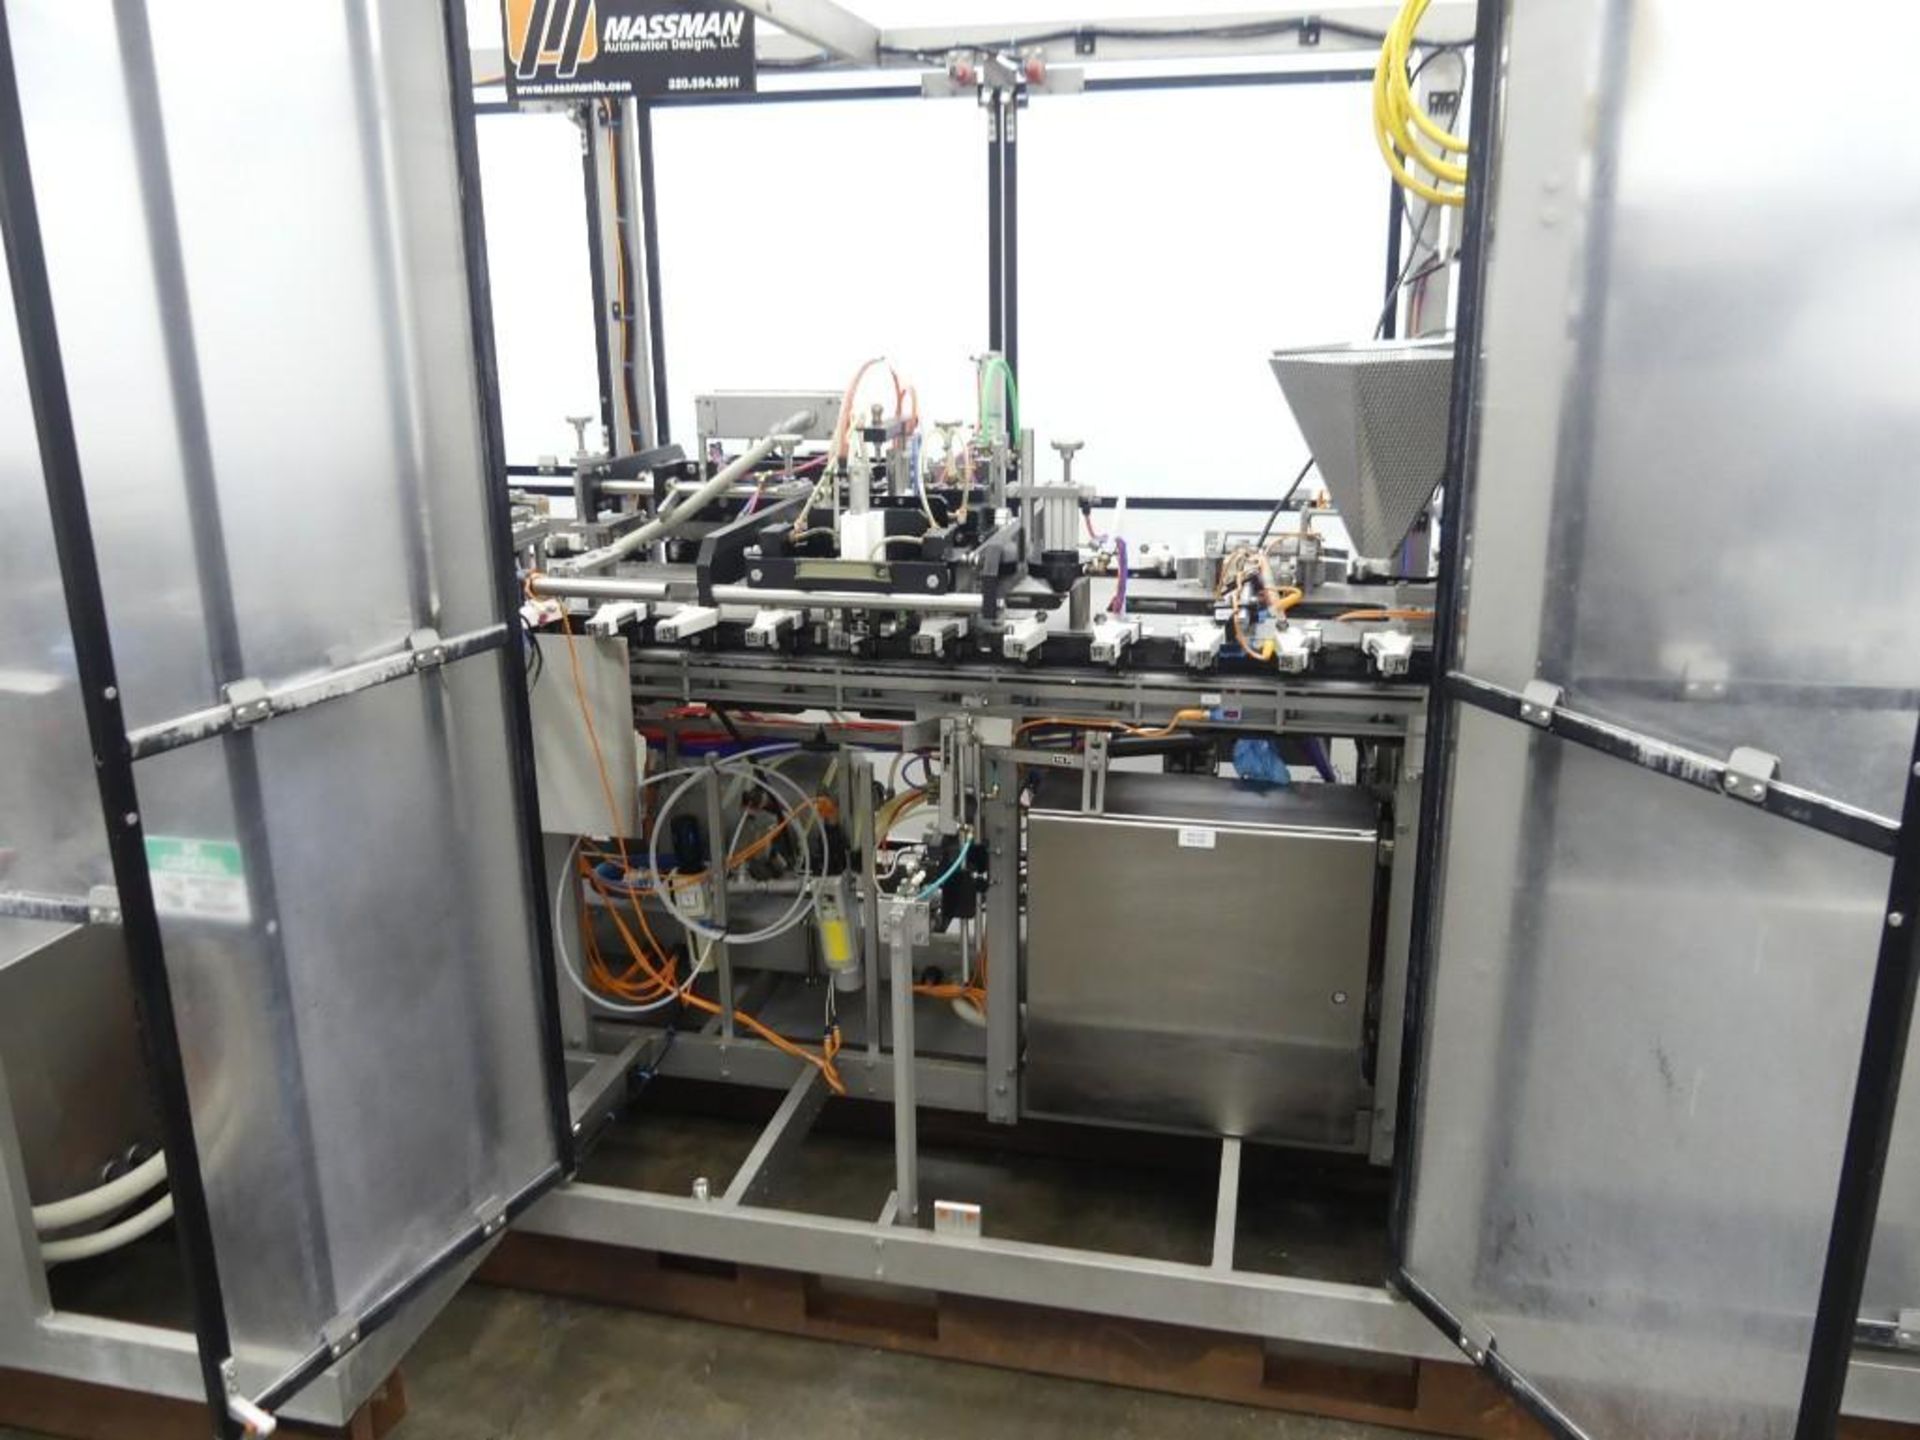 Massman HFFS-IM1000 Flexible Pouch Packaging System - Image 27 of 127